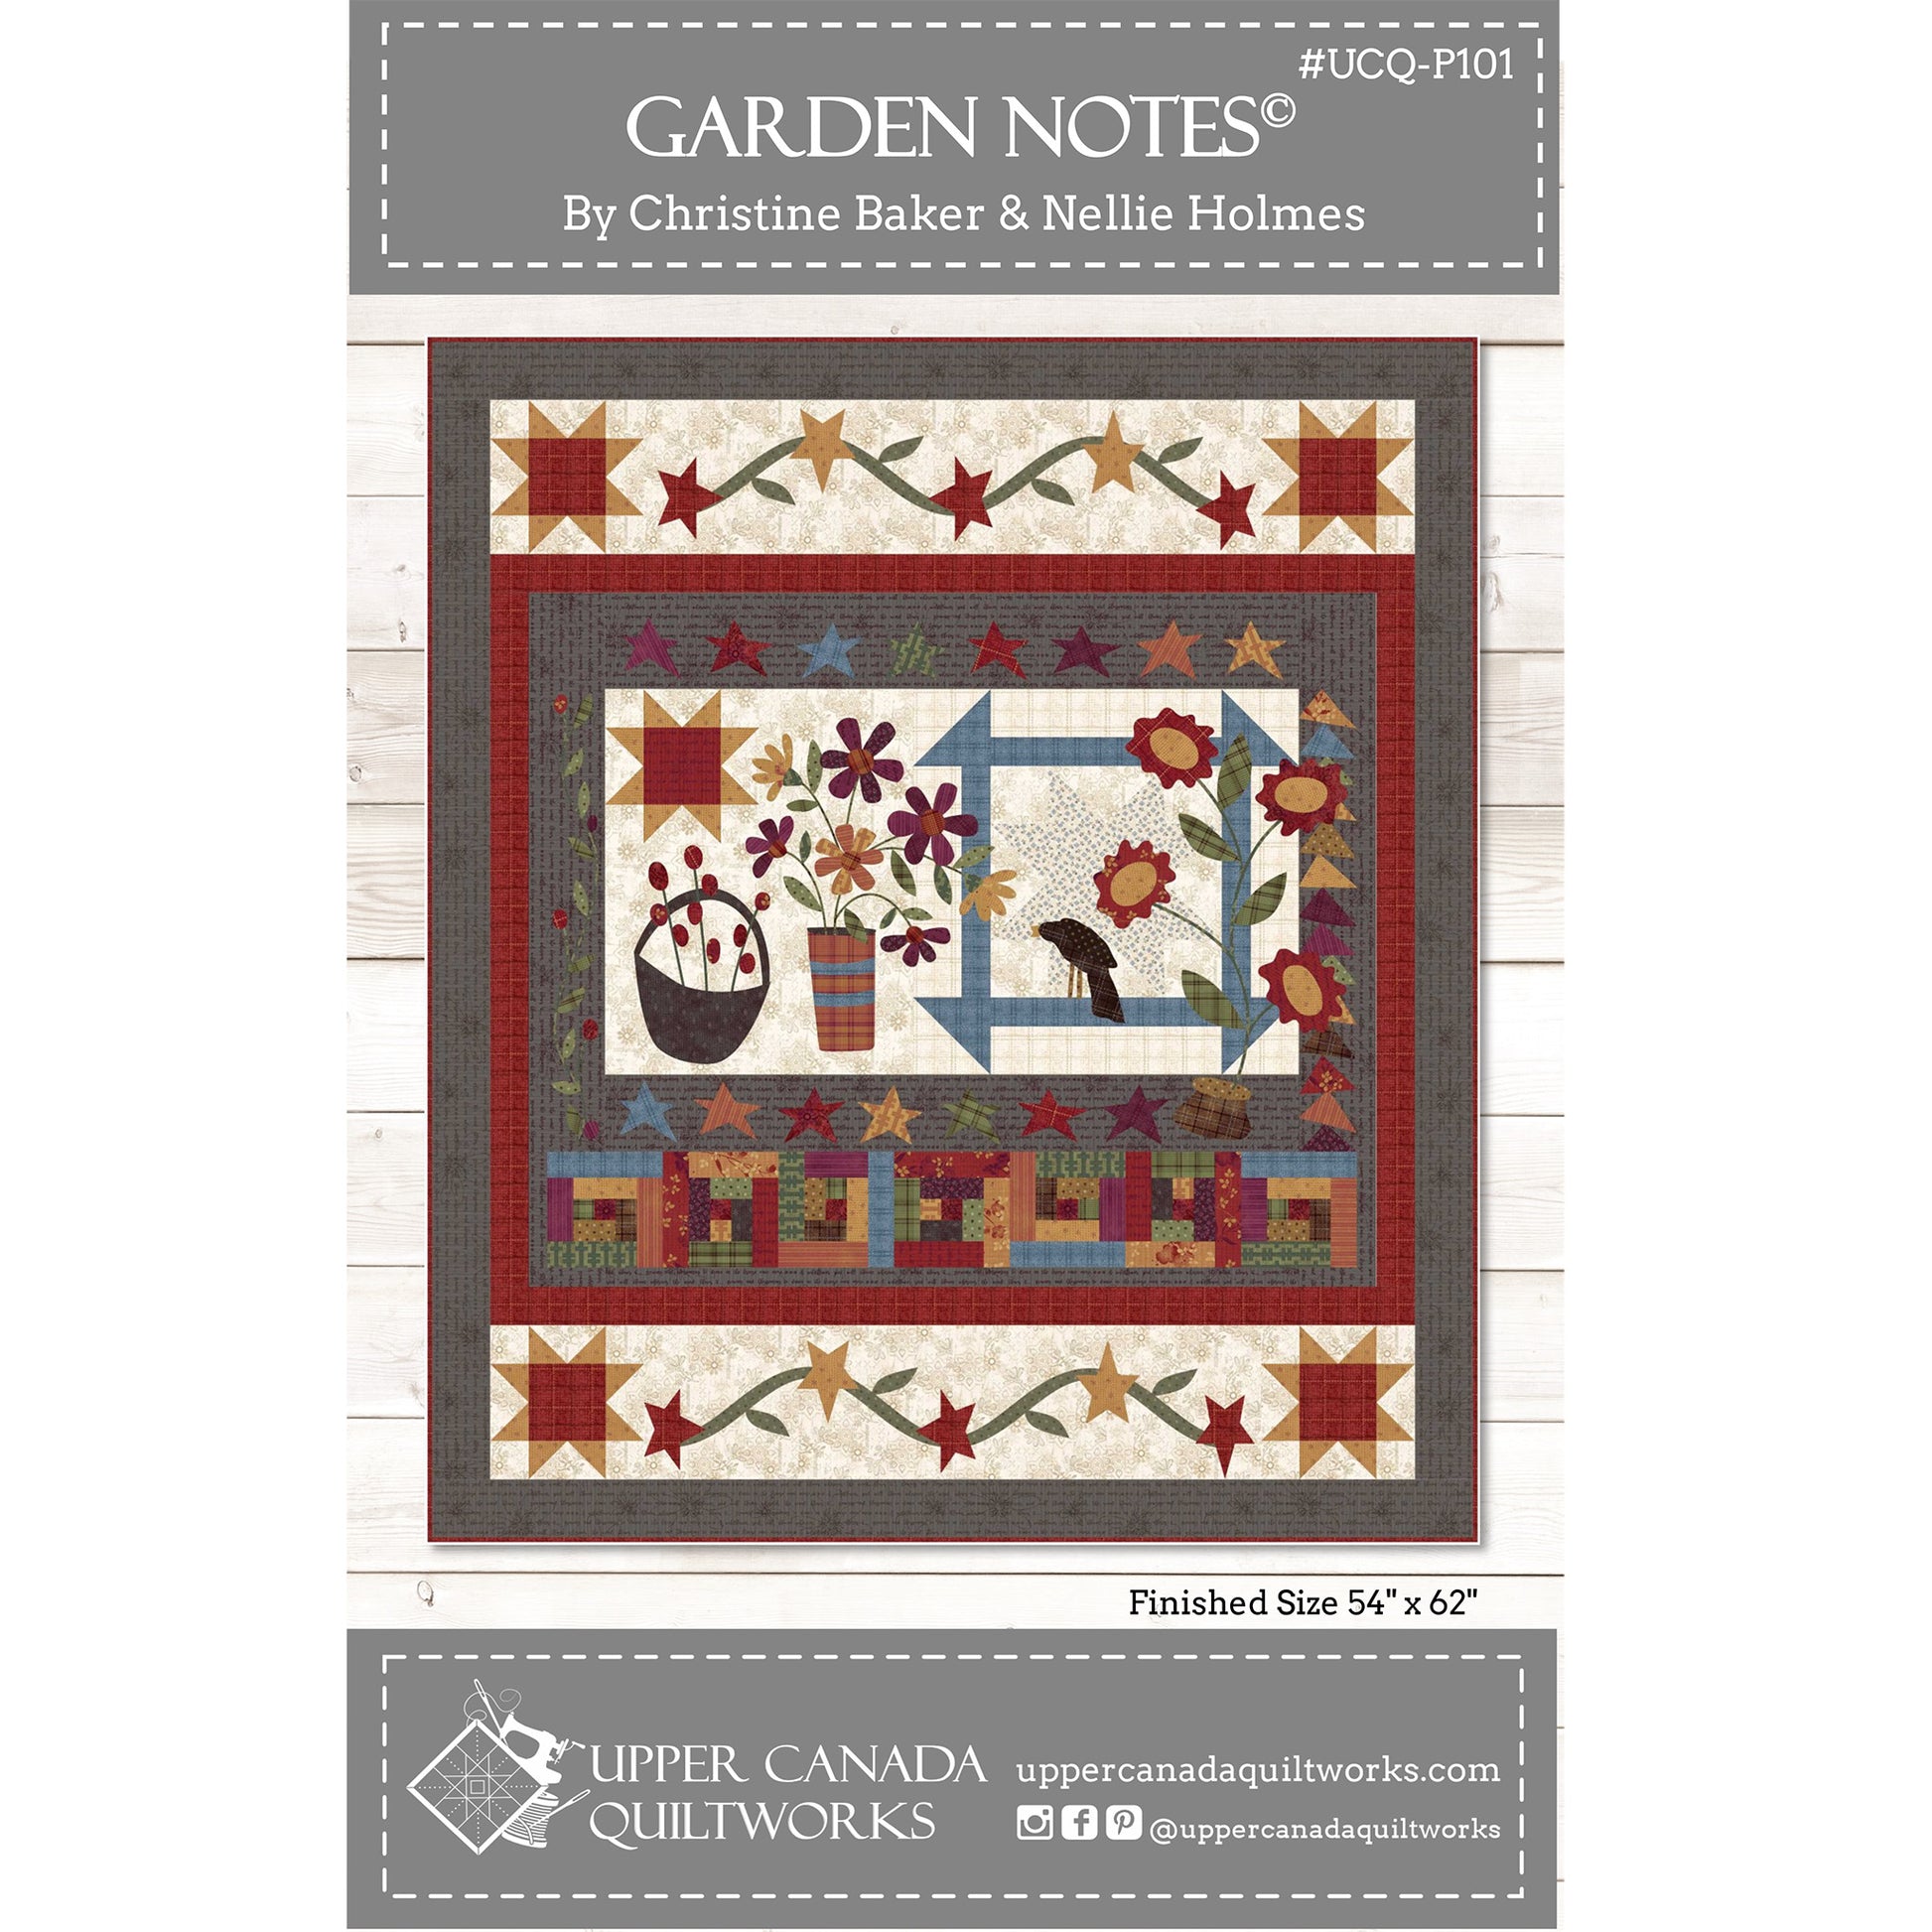 Cover image of pattern for Garden Notes Quilt.